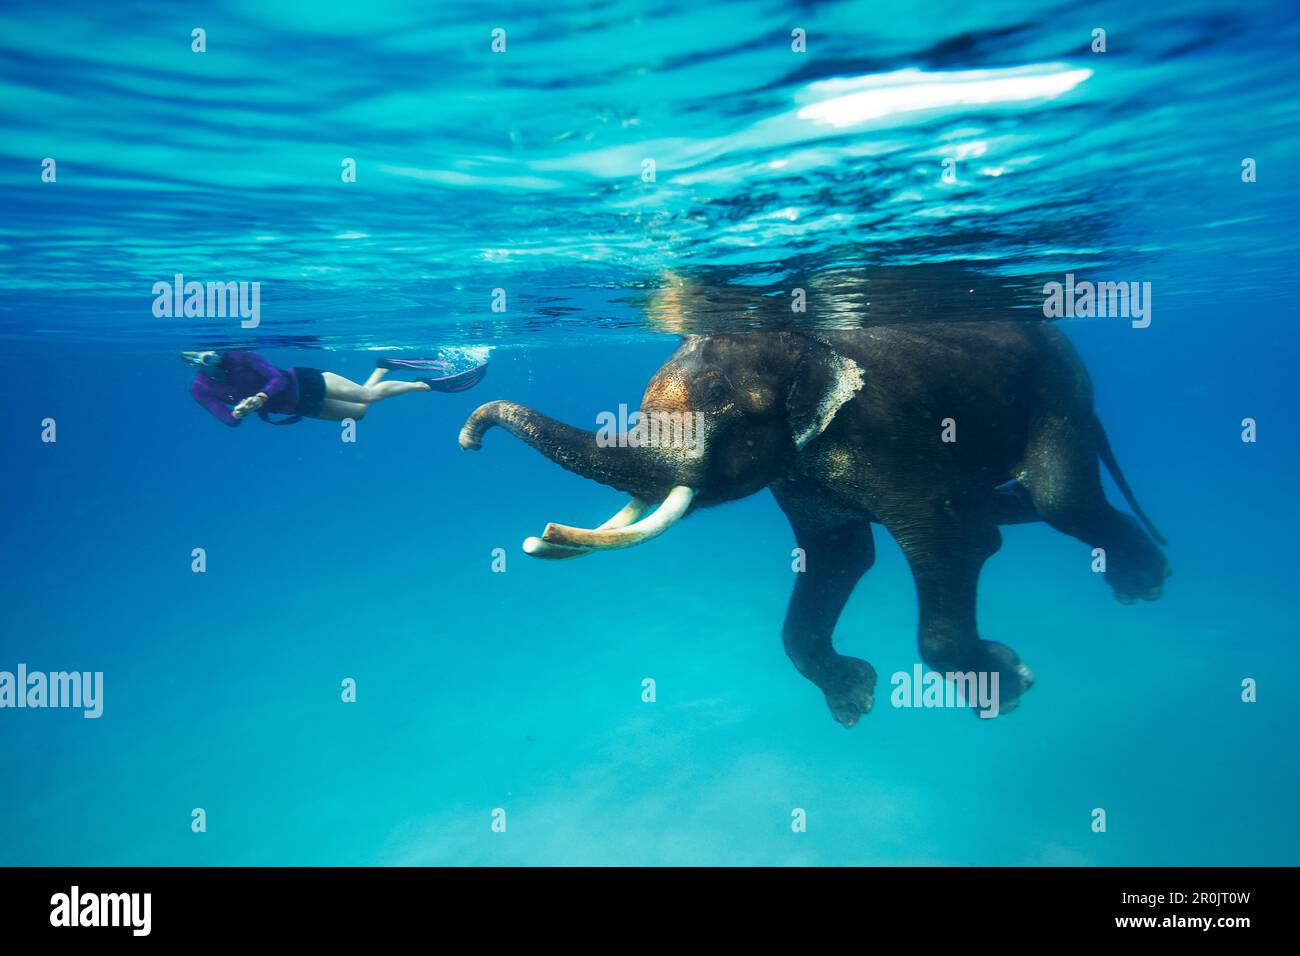 Swimming elephant Rajan, snorkelers and divers of the Barefoot Scuba Diving School accompanying him, at Beach No. 7, Havelock Island, Andaman Islands, Stock Photo